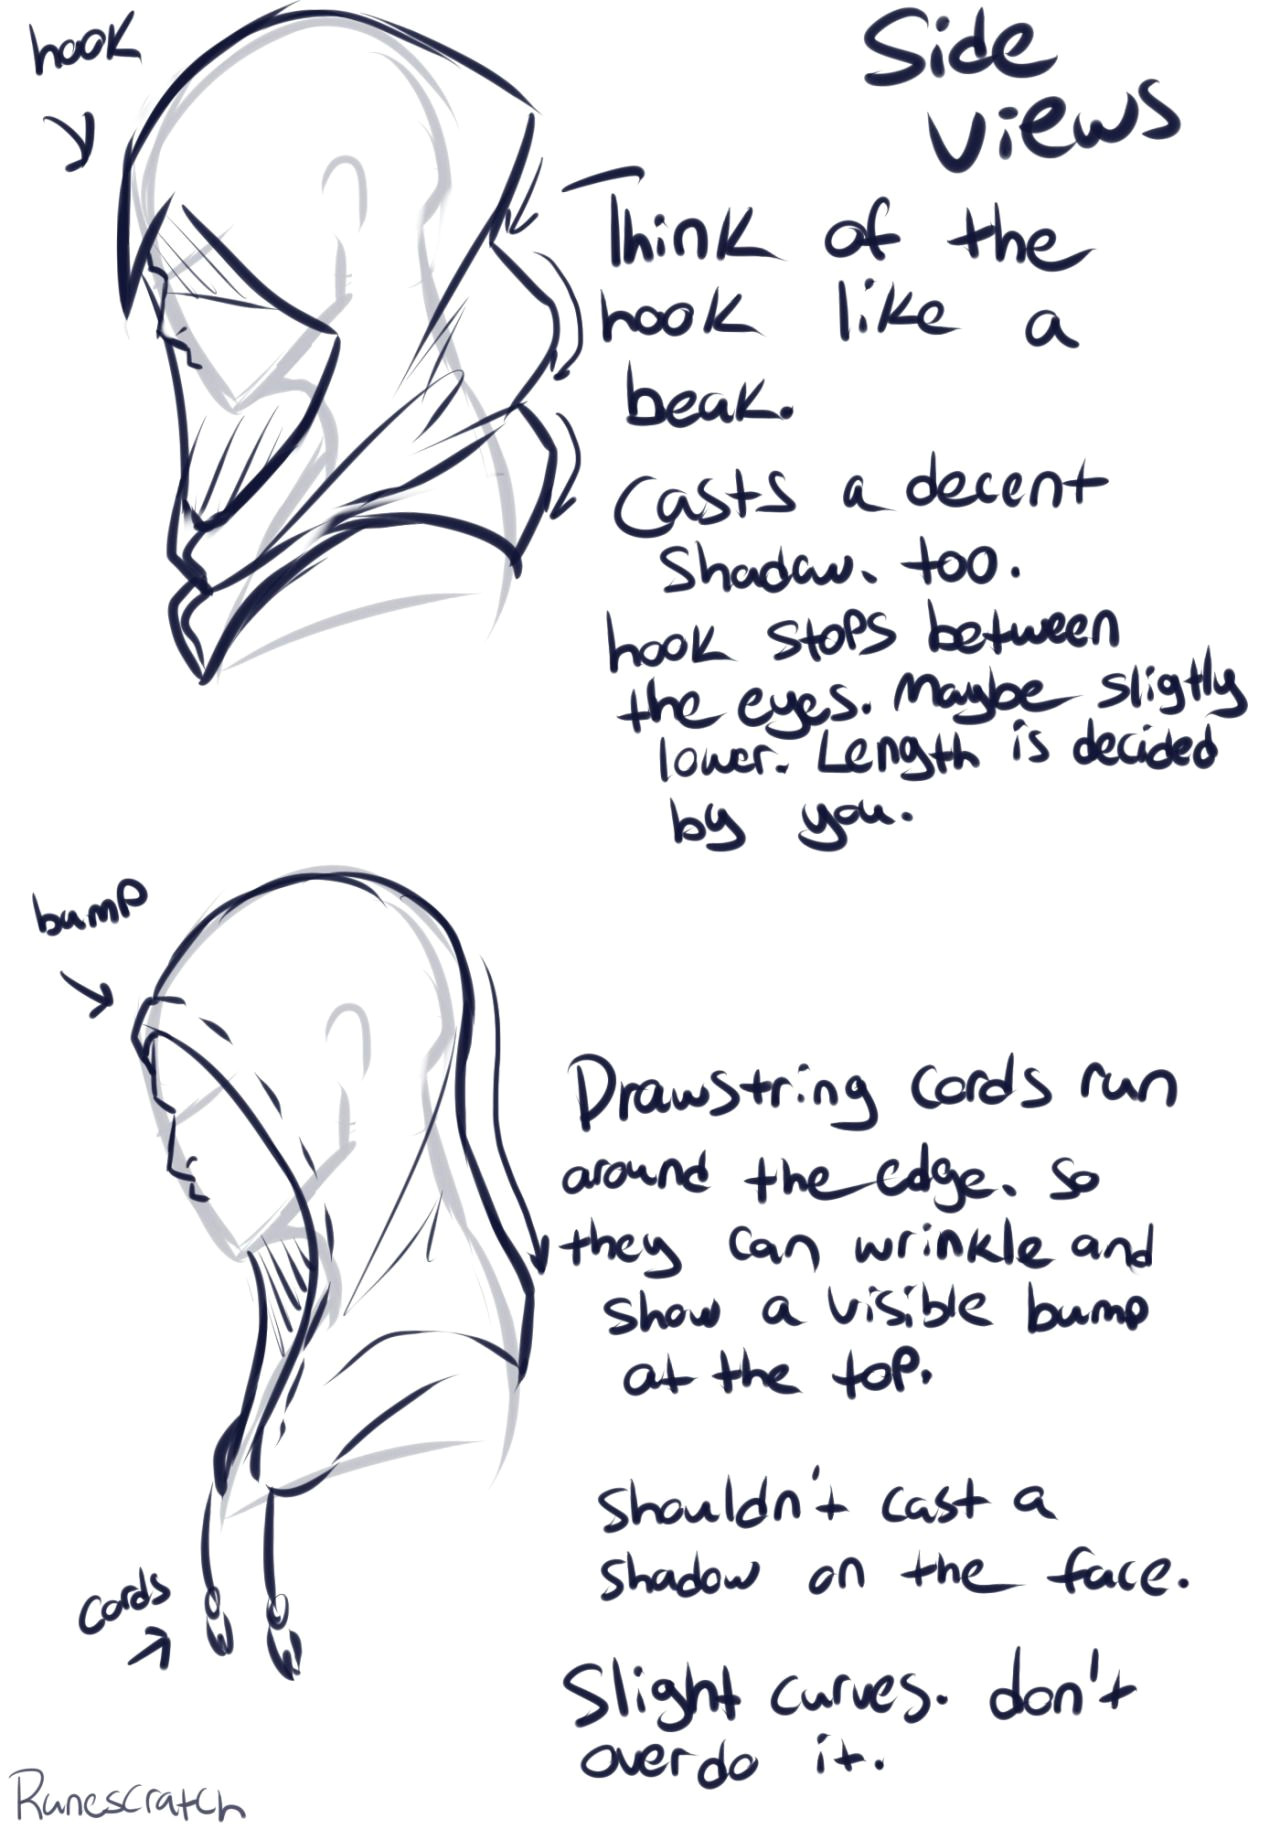 hoods art reference by talon rune from silly chicken scratch on tumblr